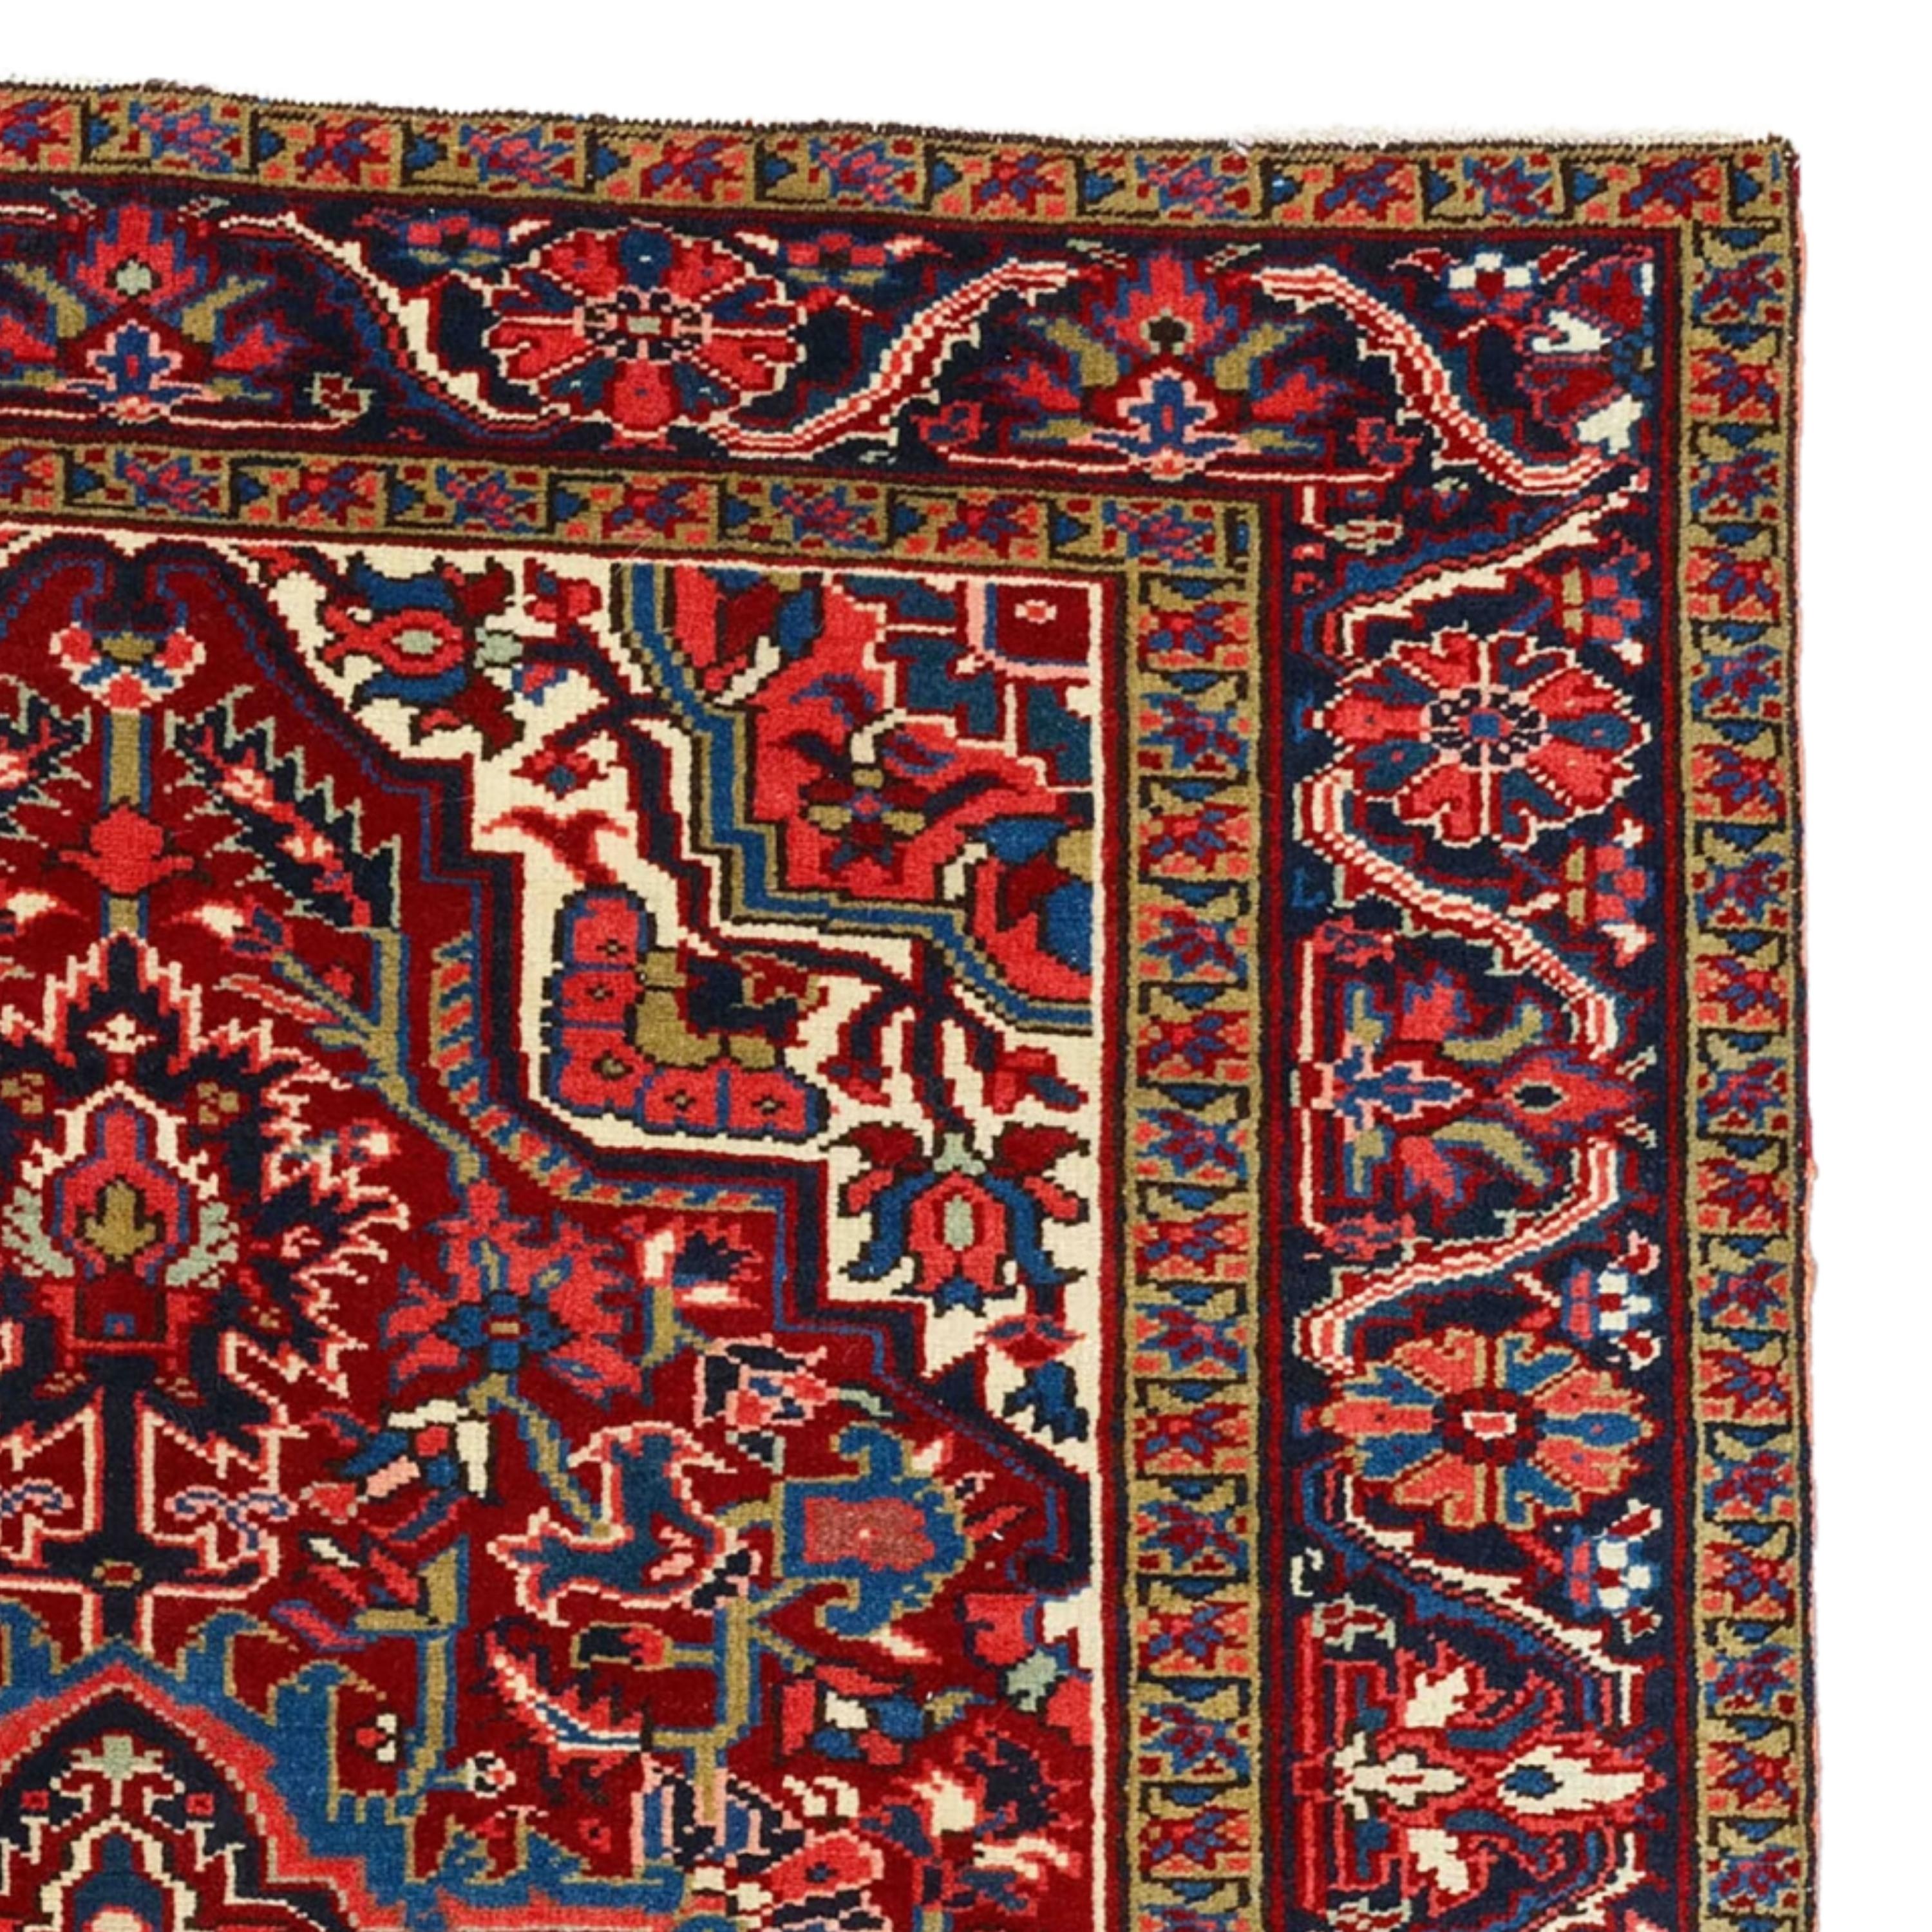 Antique Heriz Rug - Late of the 19th Century Heriz Rug, Antique Rug, Vintage Rug In Good Condition For Sale In Sultanahmet, 34